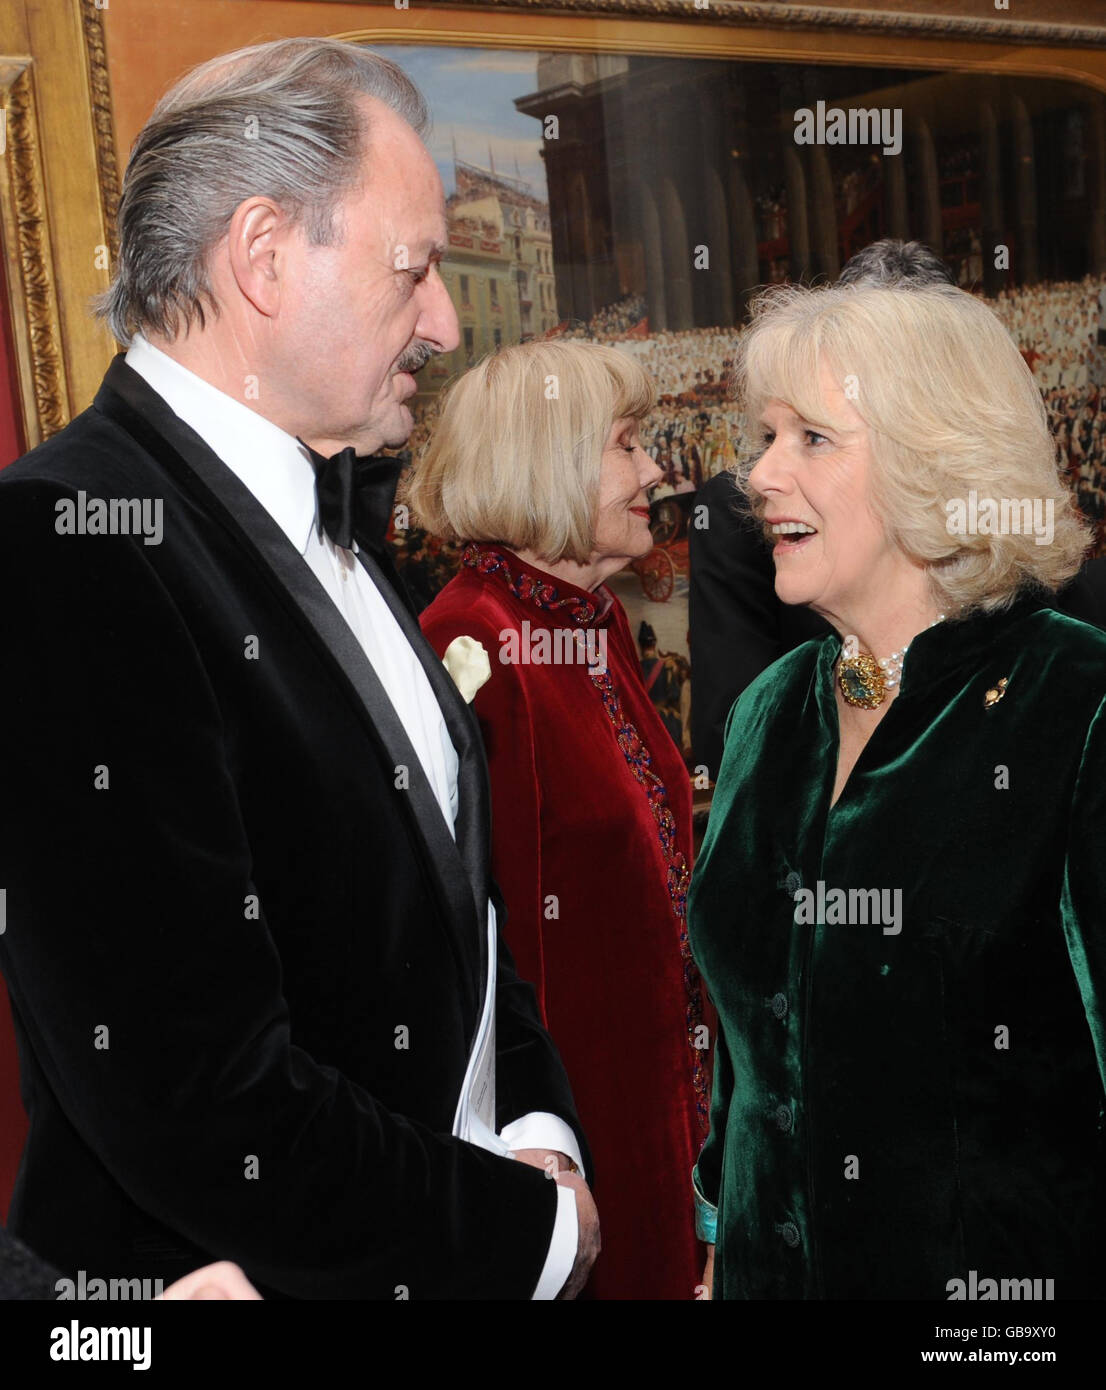 The Duchess of Cornwall meets actor Peter Bowles at the Royal British Legion Christmas celebration at the Guildhall in London. Stock Photo